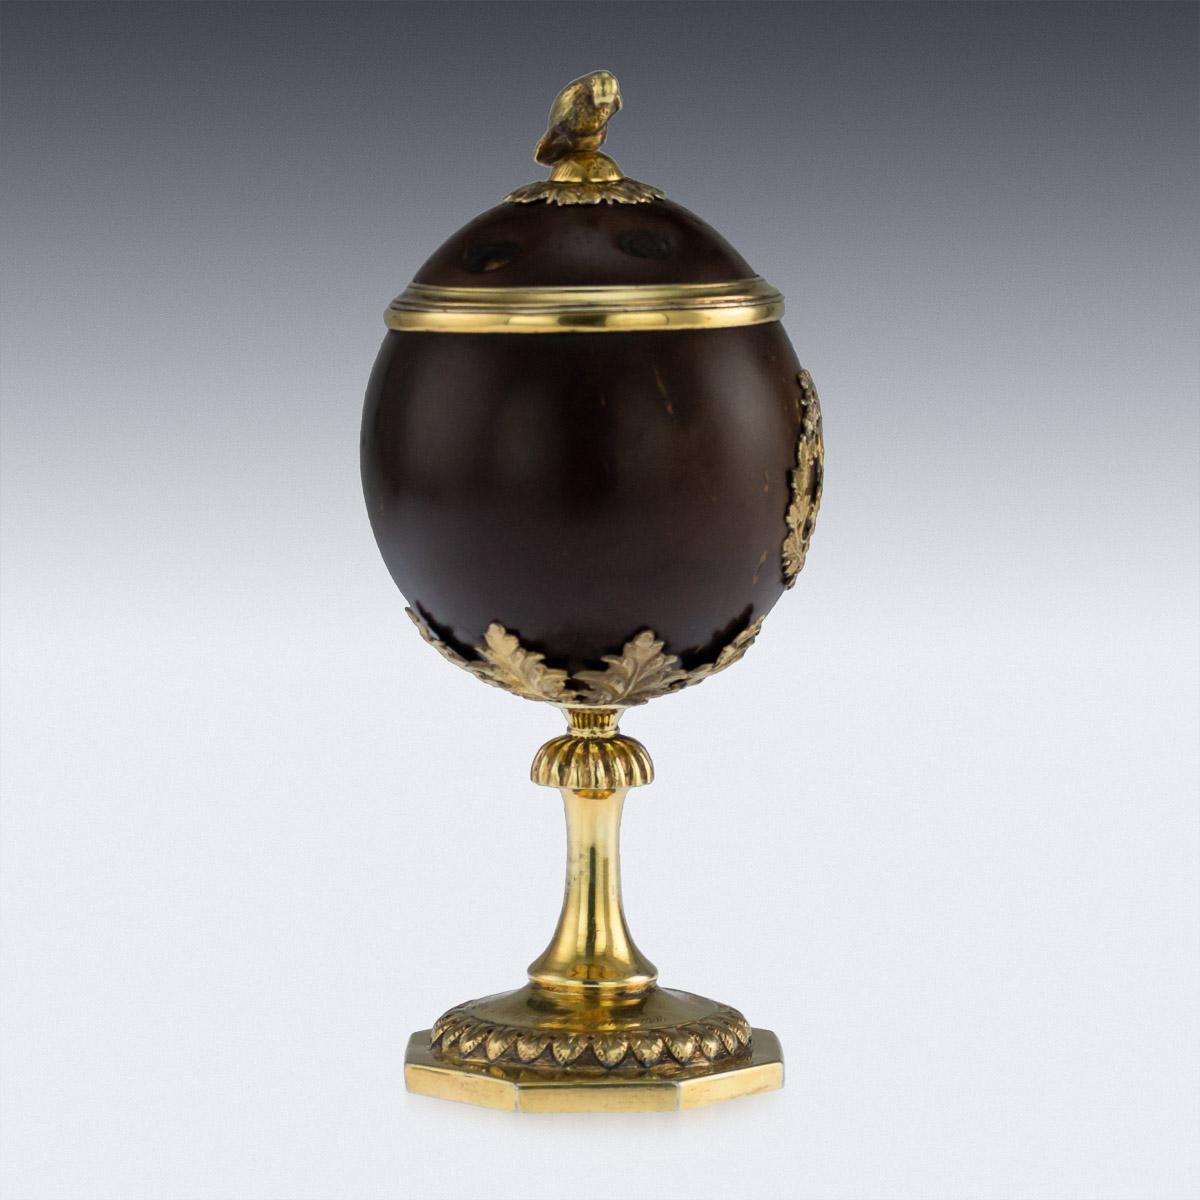 19th Century Antique Russian Silver-Gilt Mounted Coconut Lidded Cup, Tula, circa 1825